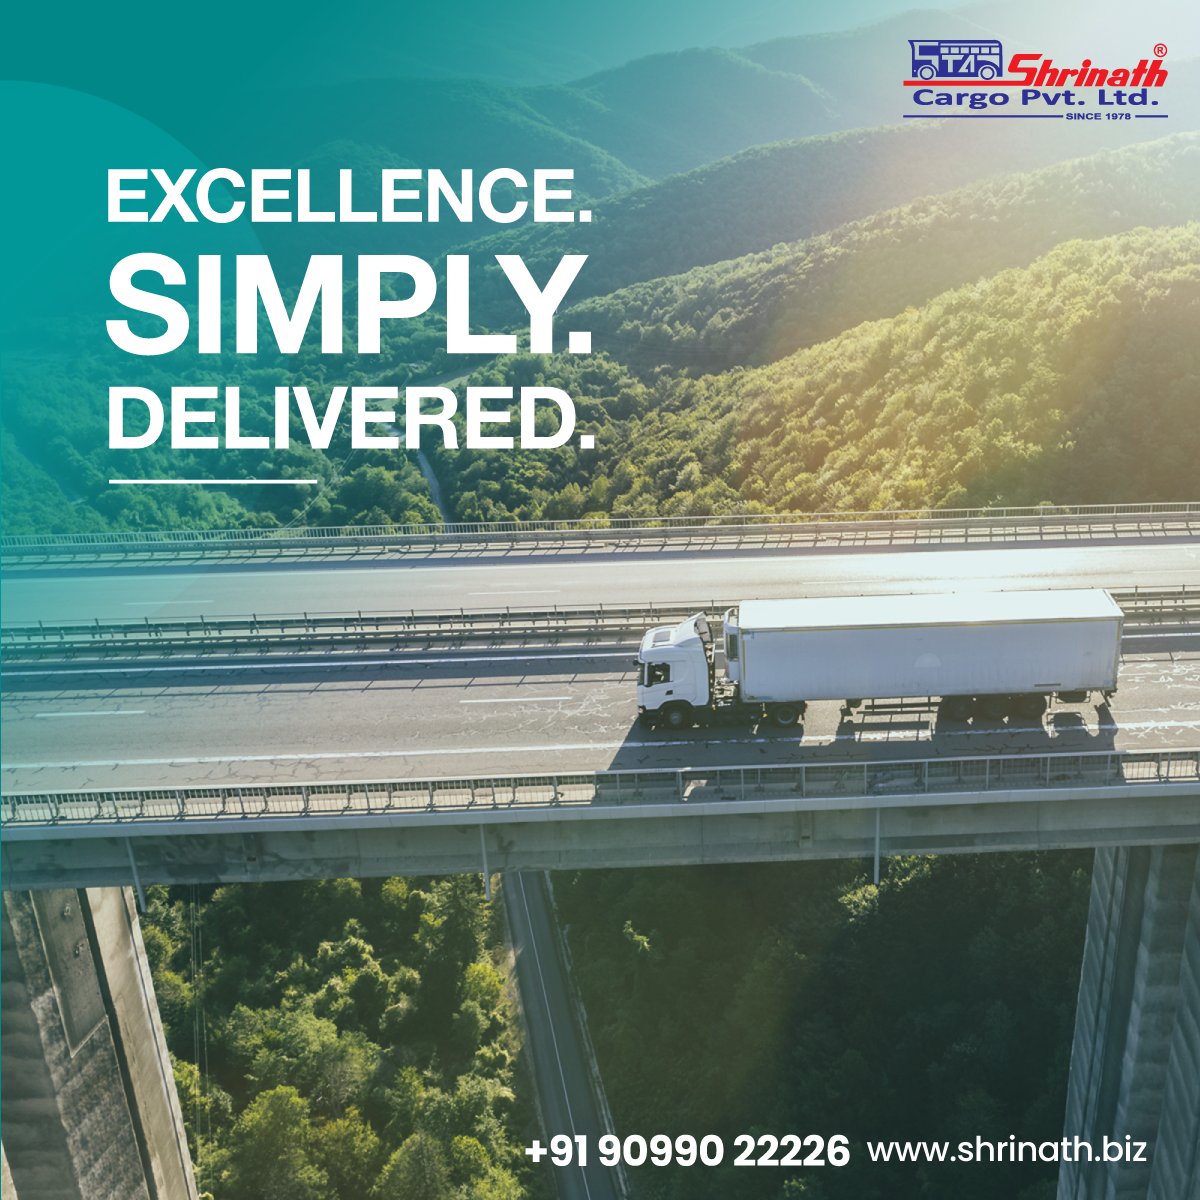 #ShrinathCargoPvtLtd - Excellence - Simply - Delivered.

#FullLoad and #PartLoad #CargoServices by #ShrinathCargoPvtLtd

📞 - 9099022226

📍 250+ centers
⏳ Timely Delivery
📦 Safe Transport
.
.
#ShrinathCargo #Cargo #cargoservice #dailyservice #logistics #cargotrucks #parcel